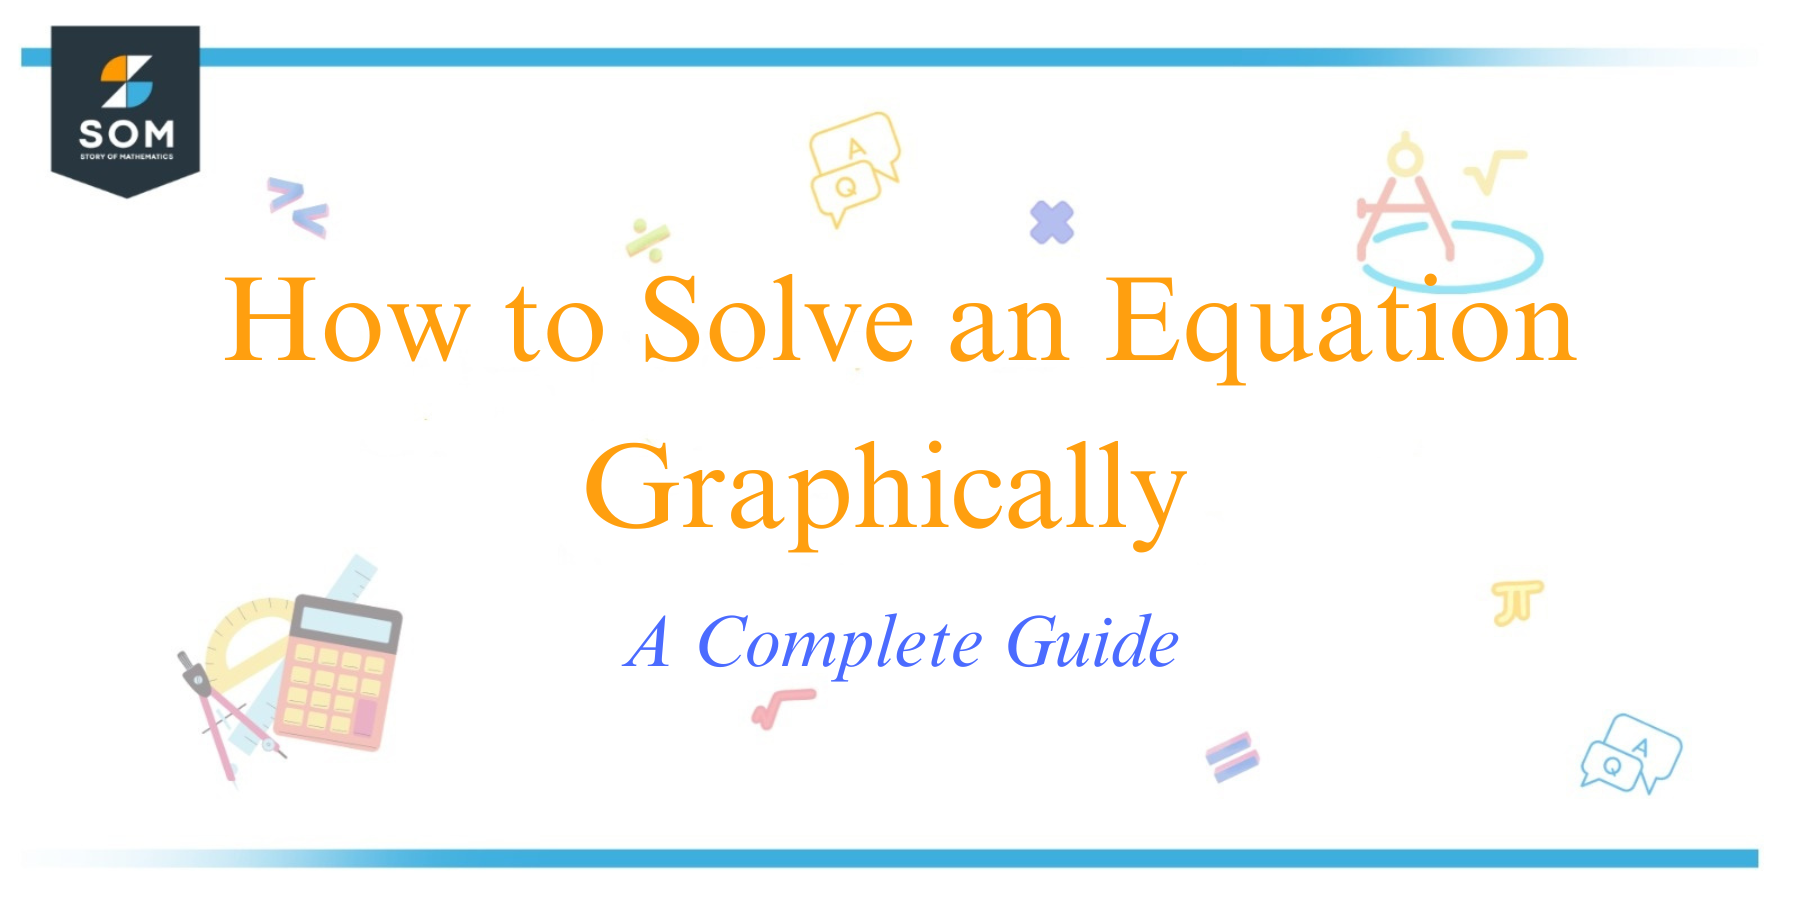 How to Solve an Equation Graphically A Complete Guide